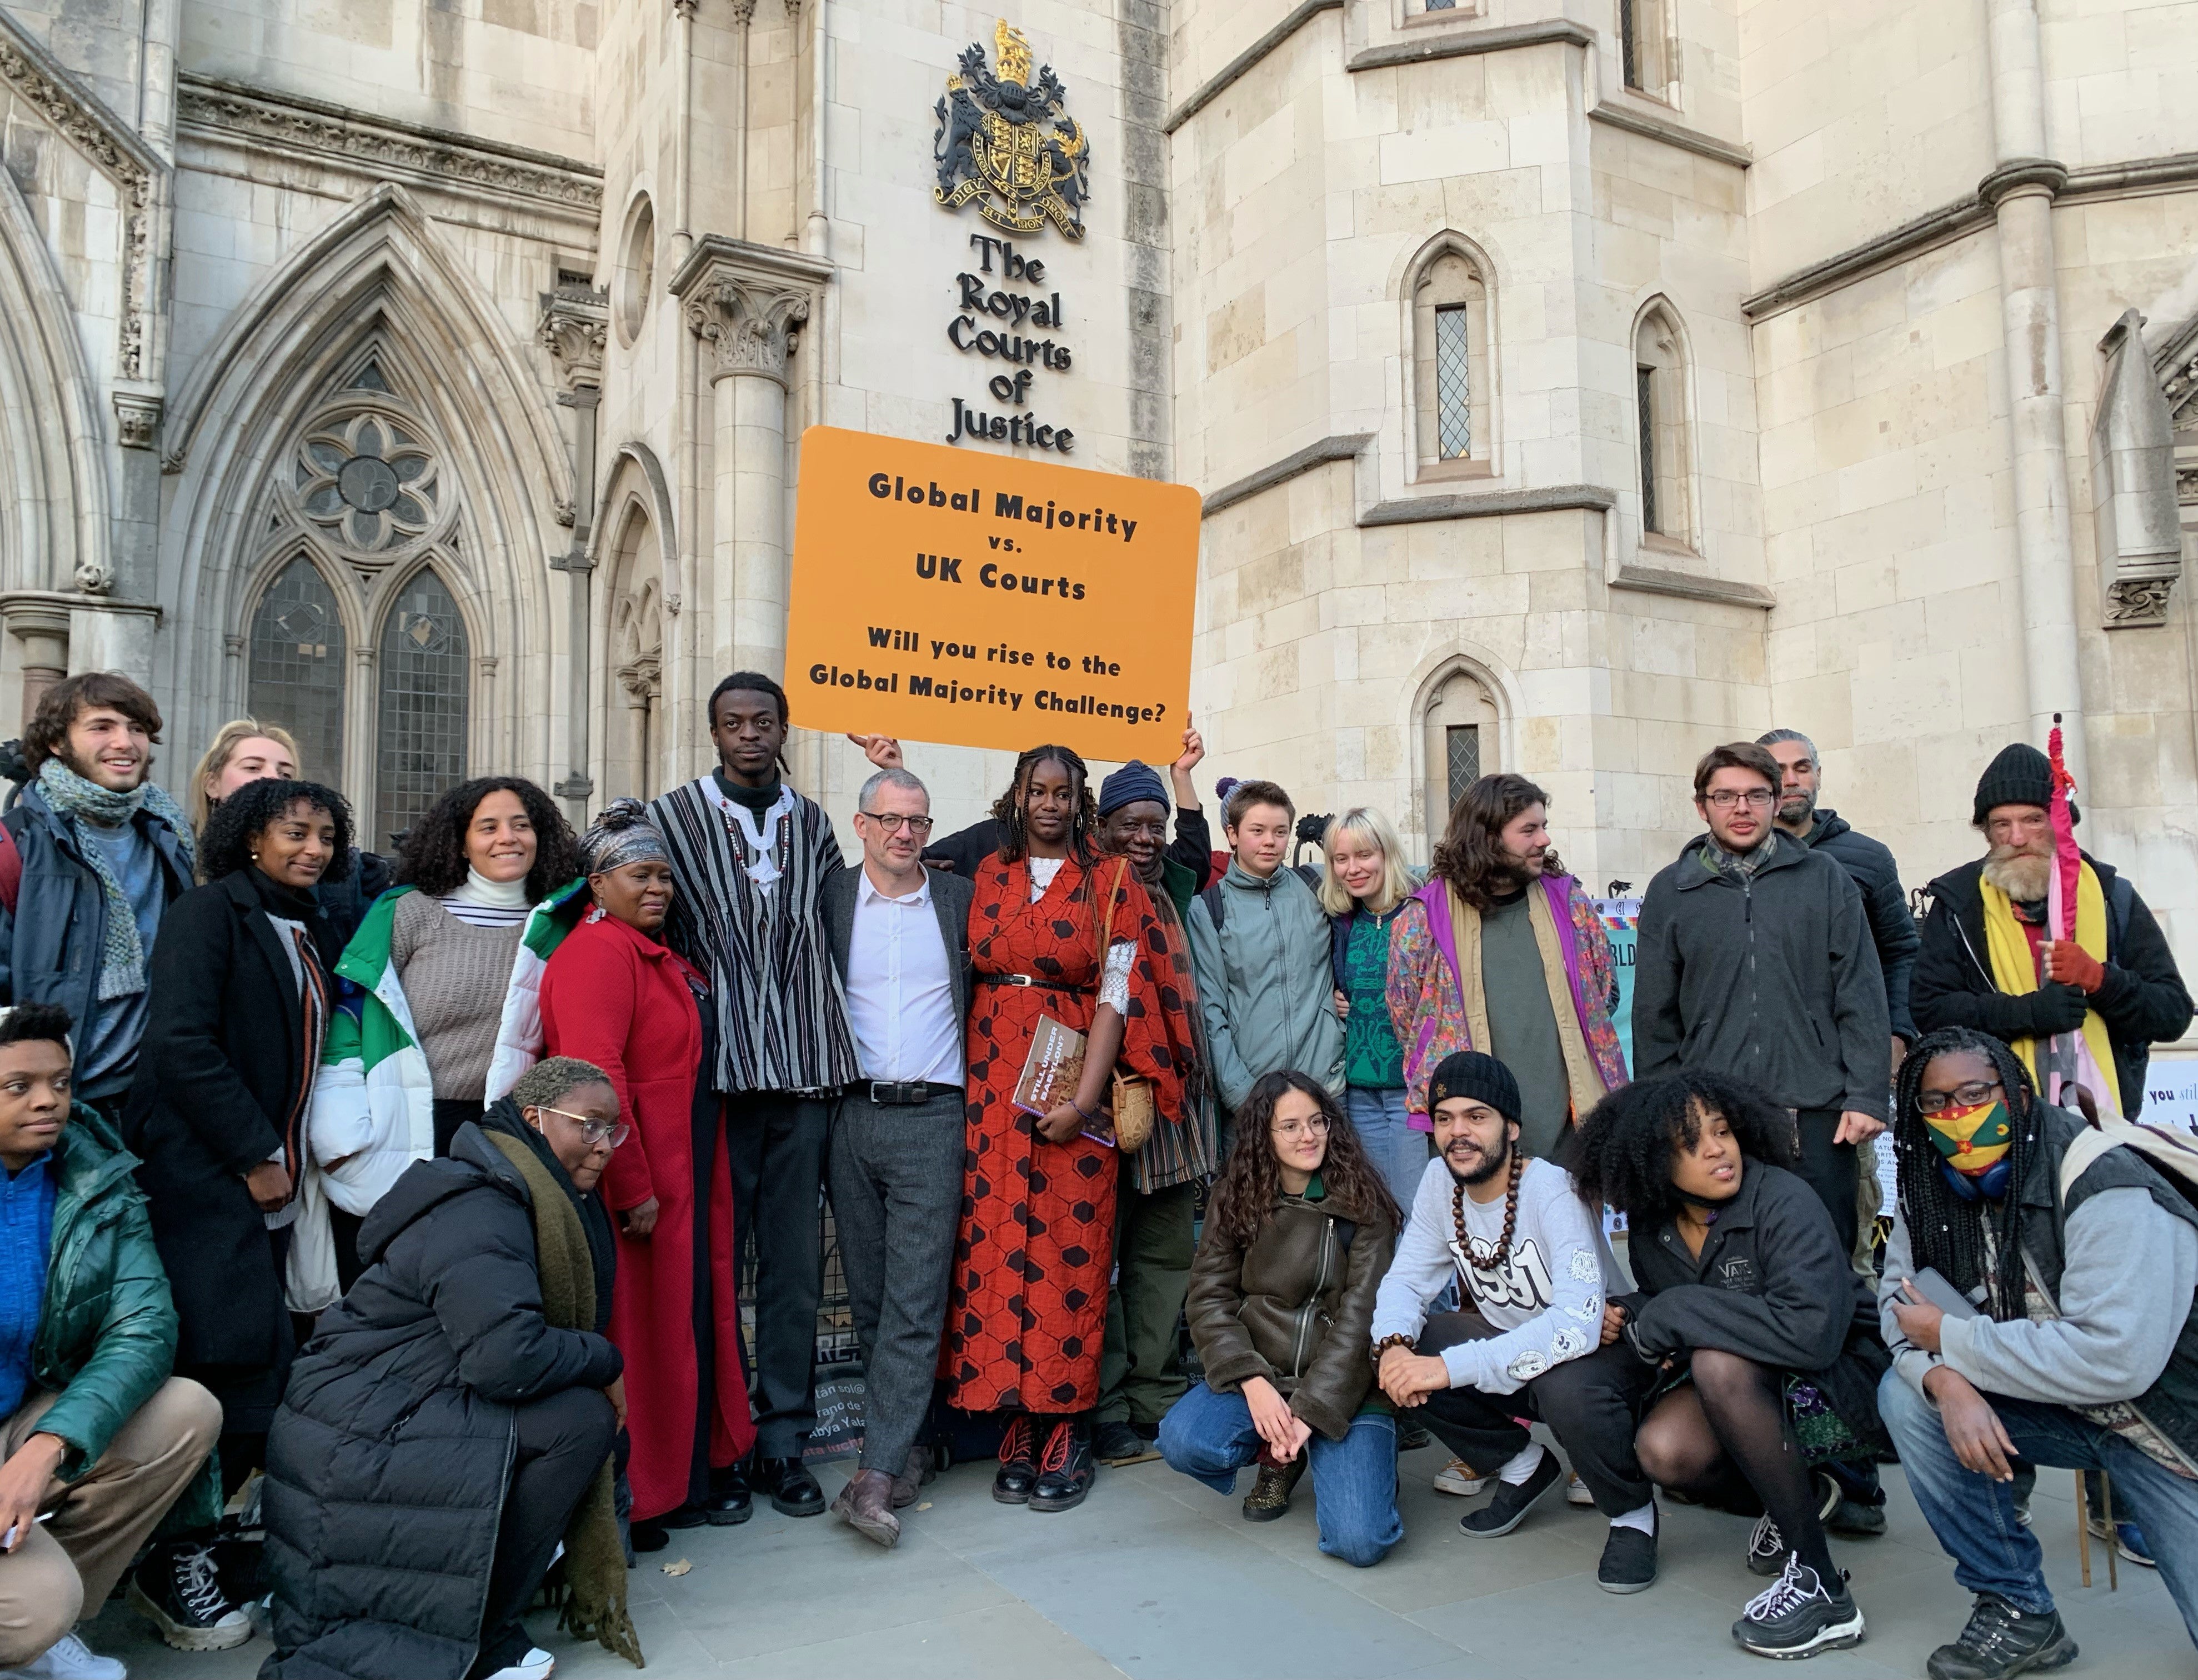 Climate activists outside the Royal Courts of Justice in London